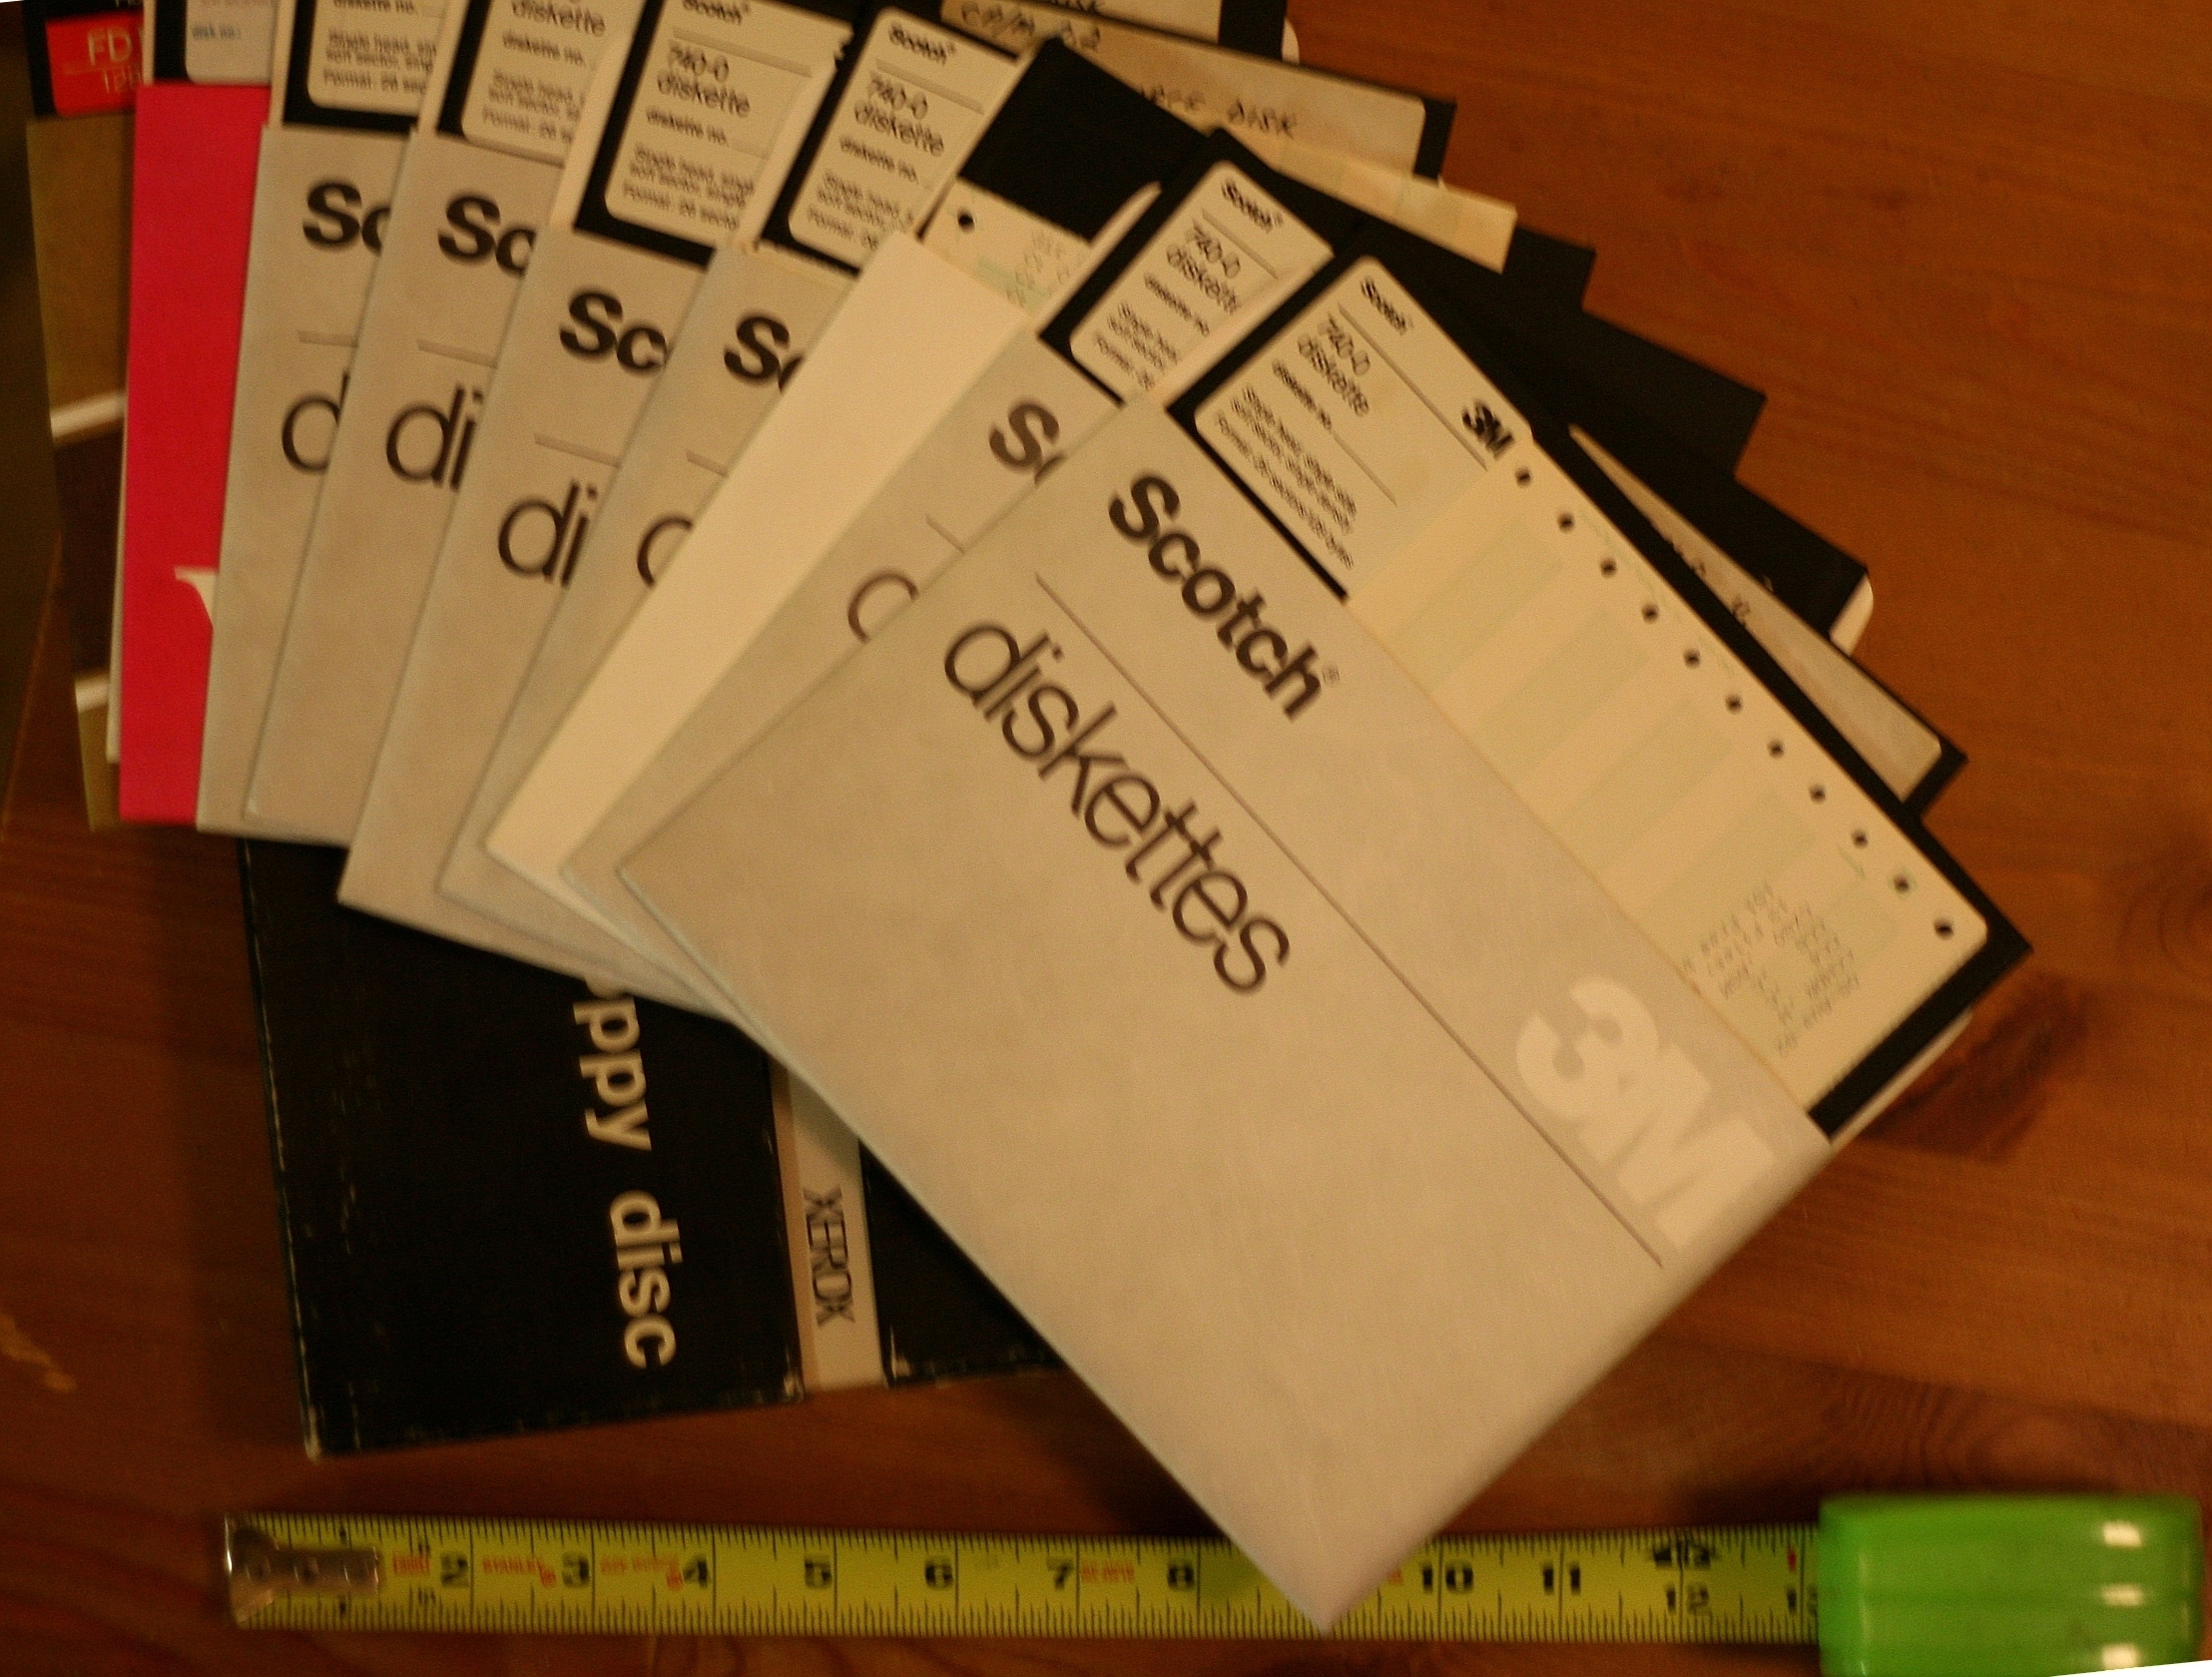 A collection of vintage labeled floppy disks spread out, next to a ruler for scale